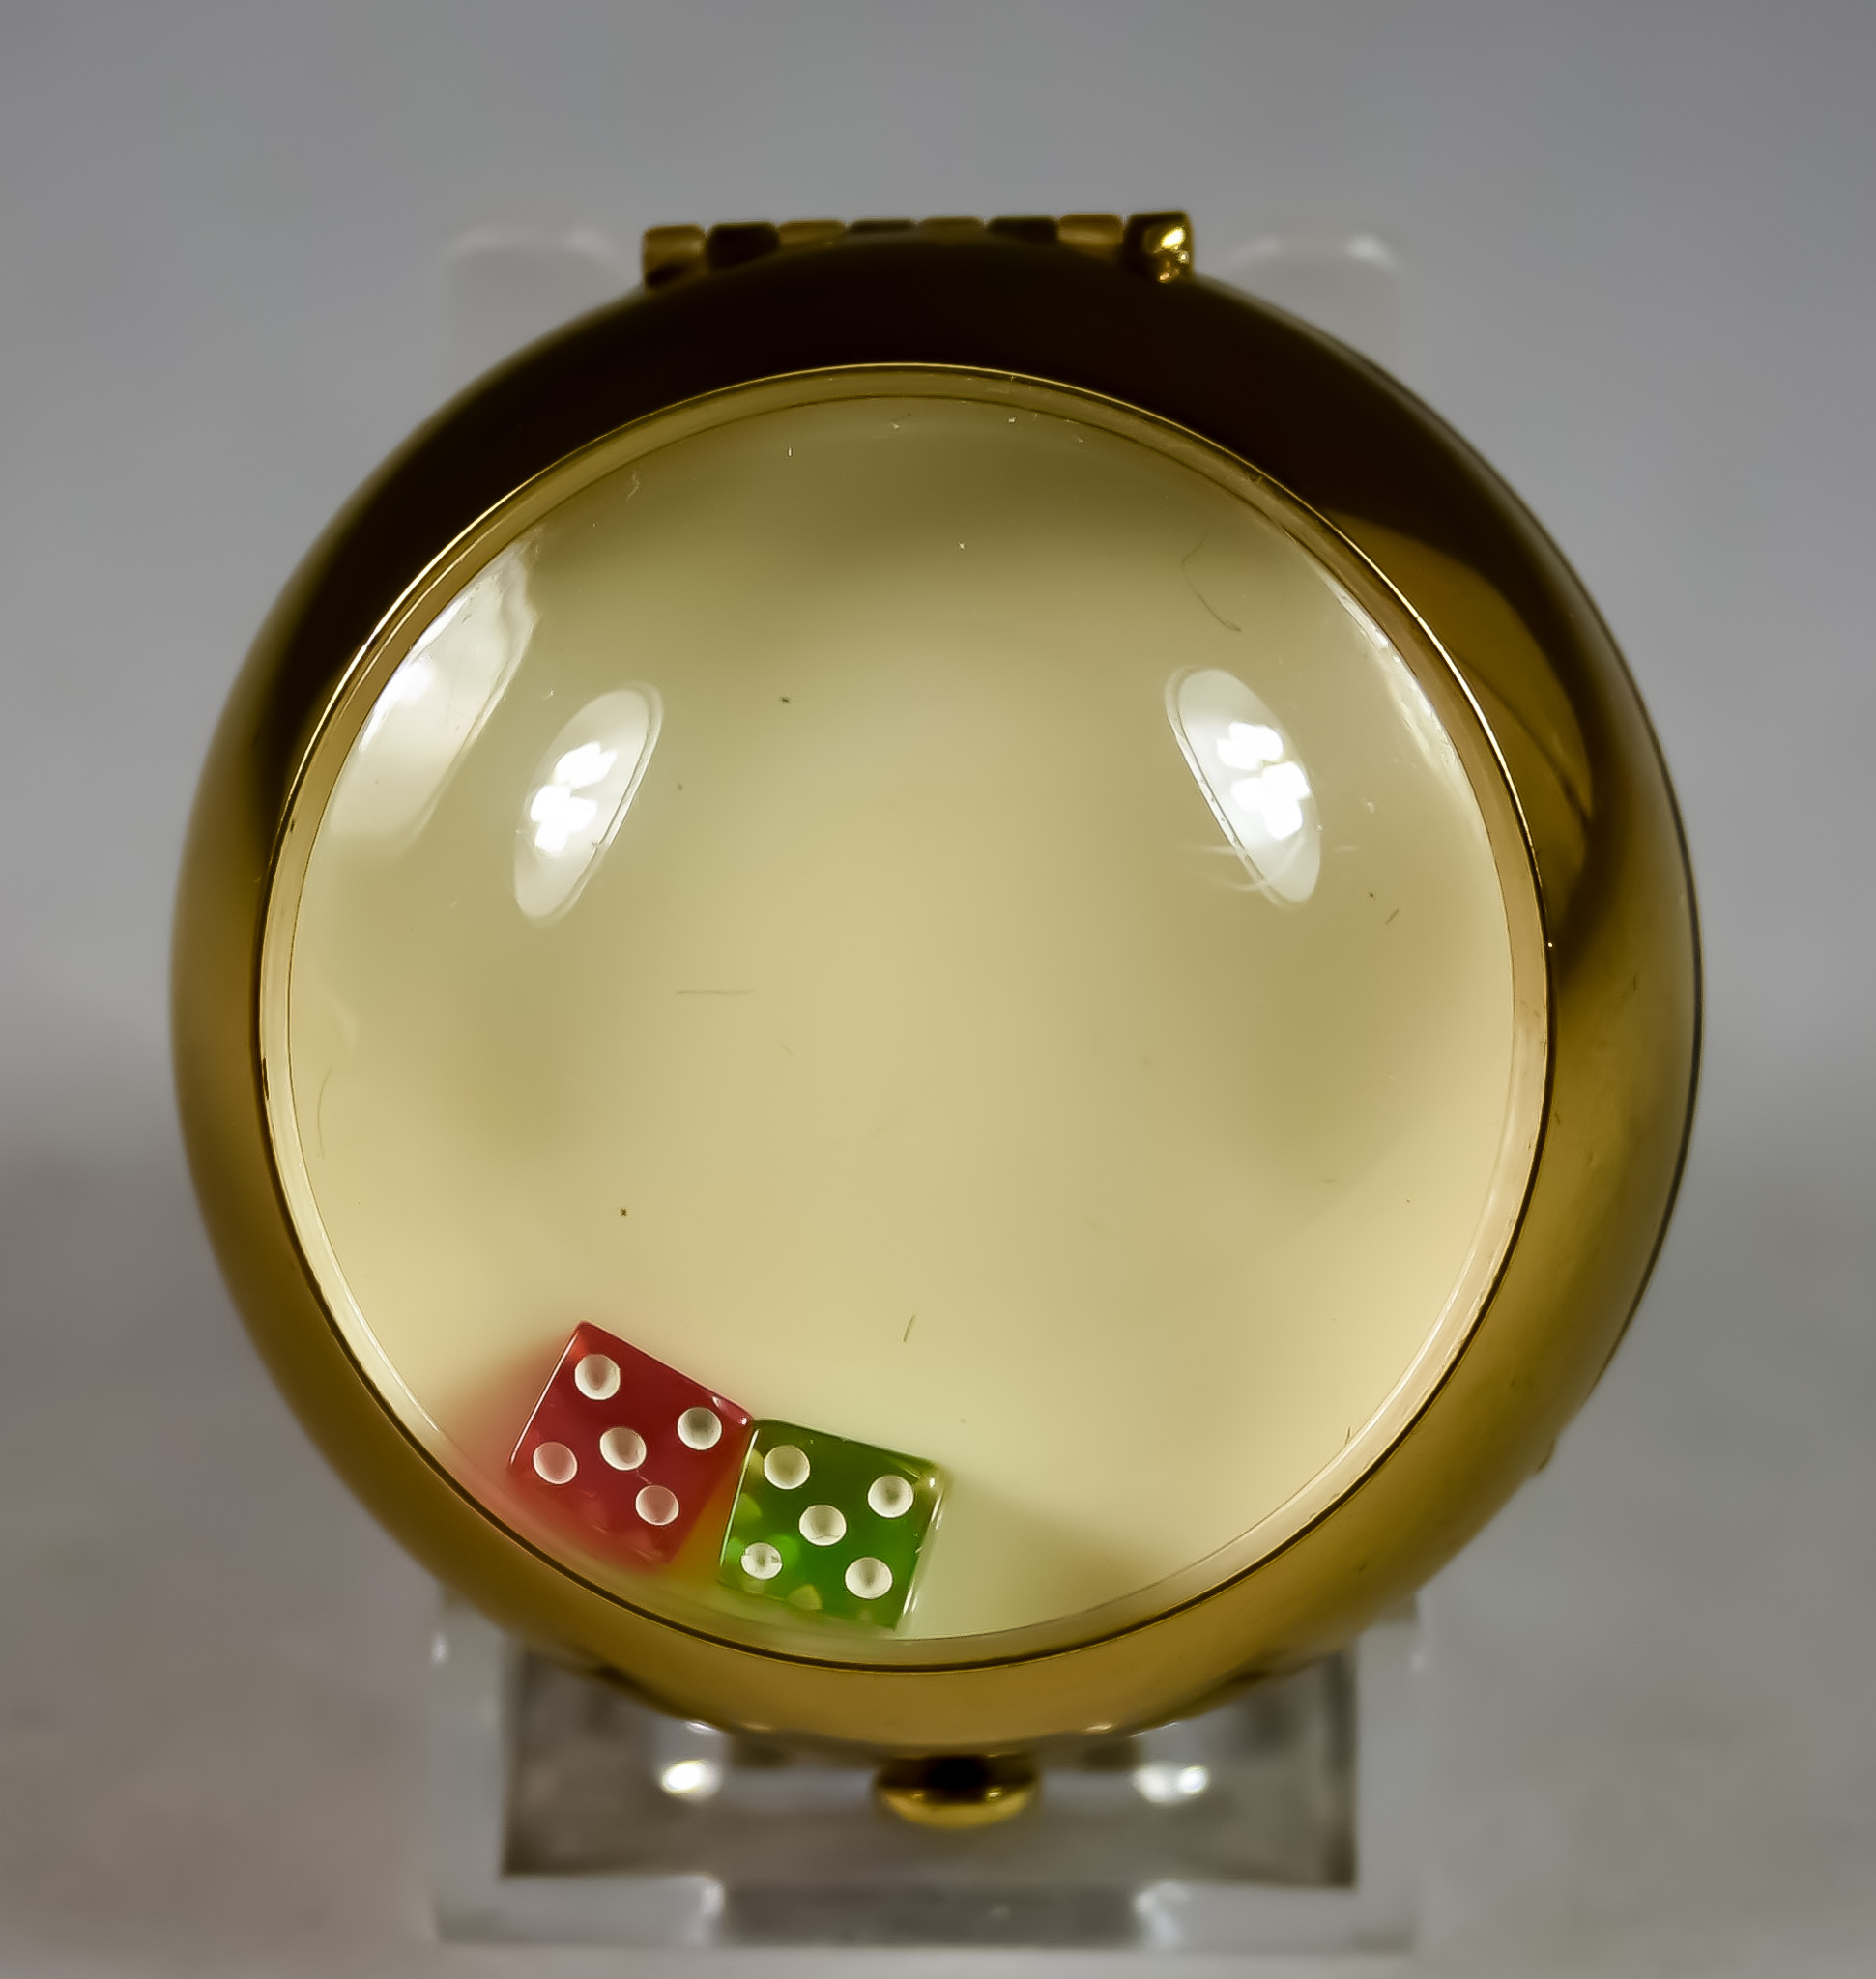 A 1950's Parker Pen Wadsworth Powder Compact with Lucite Top and Lucky Dice, with sifter and puff,